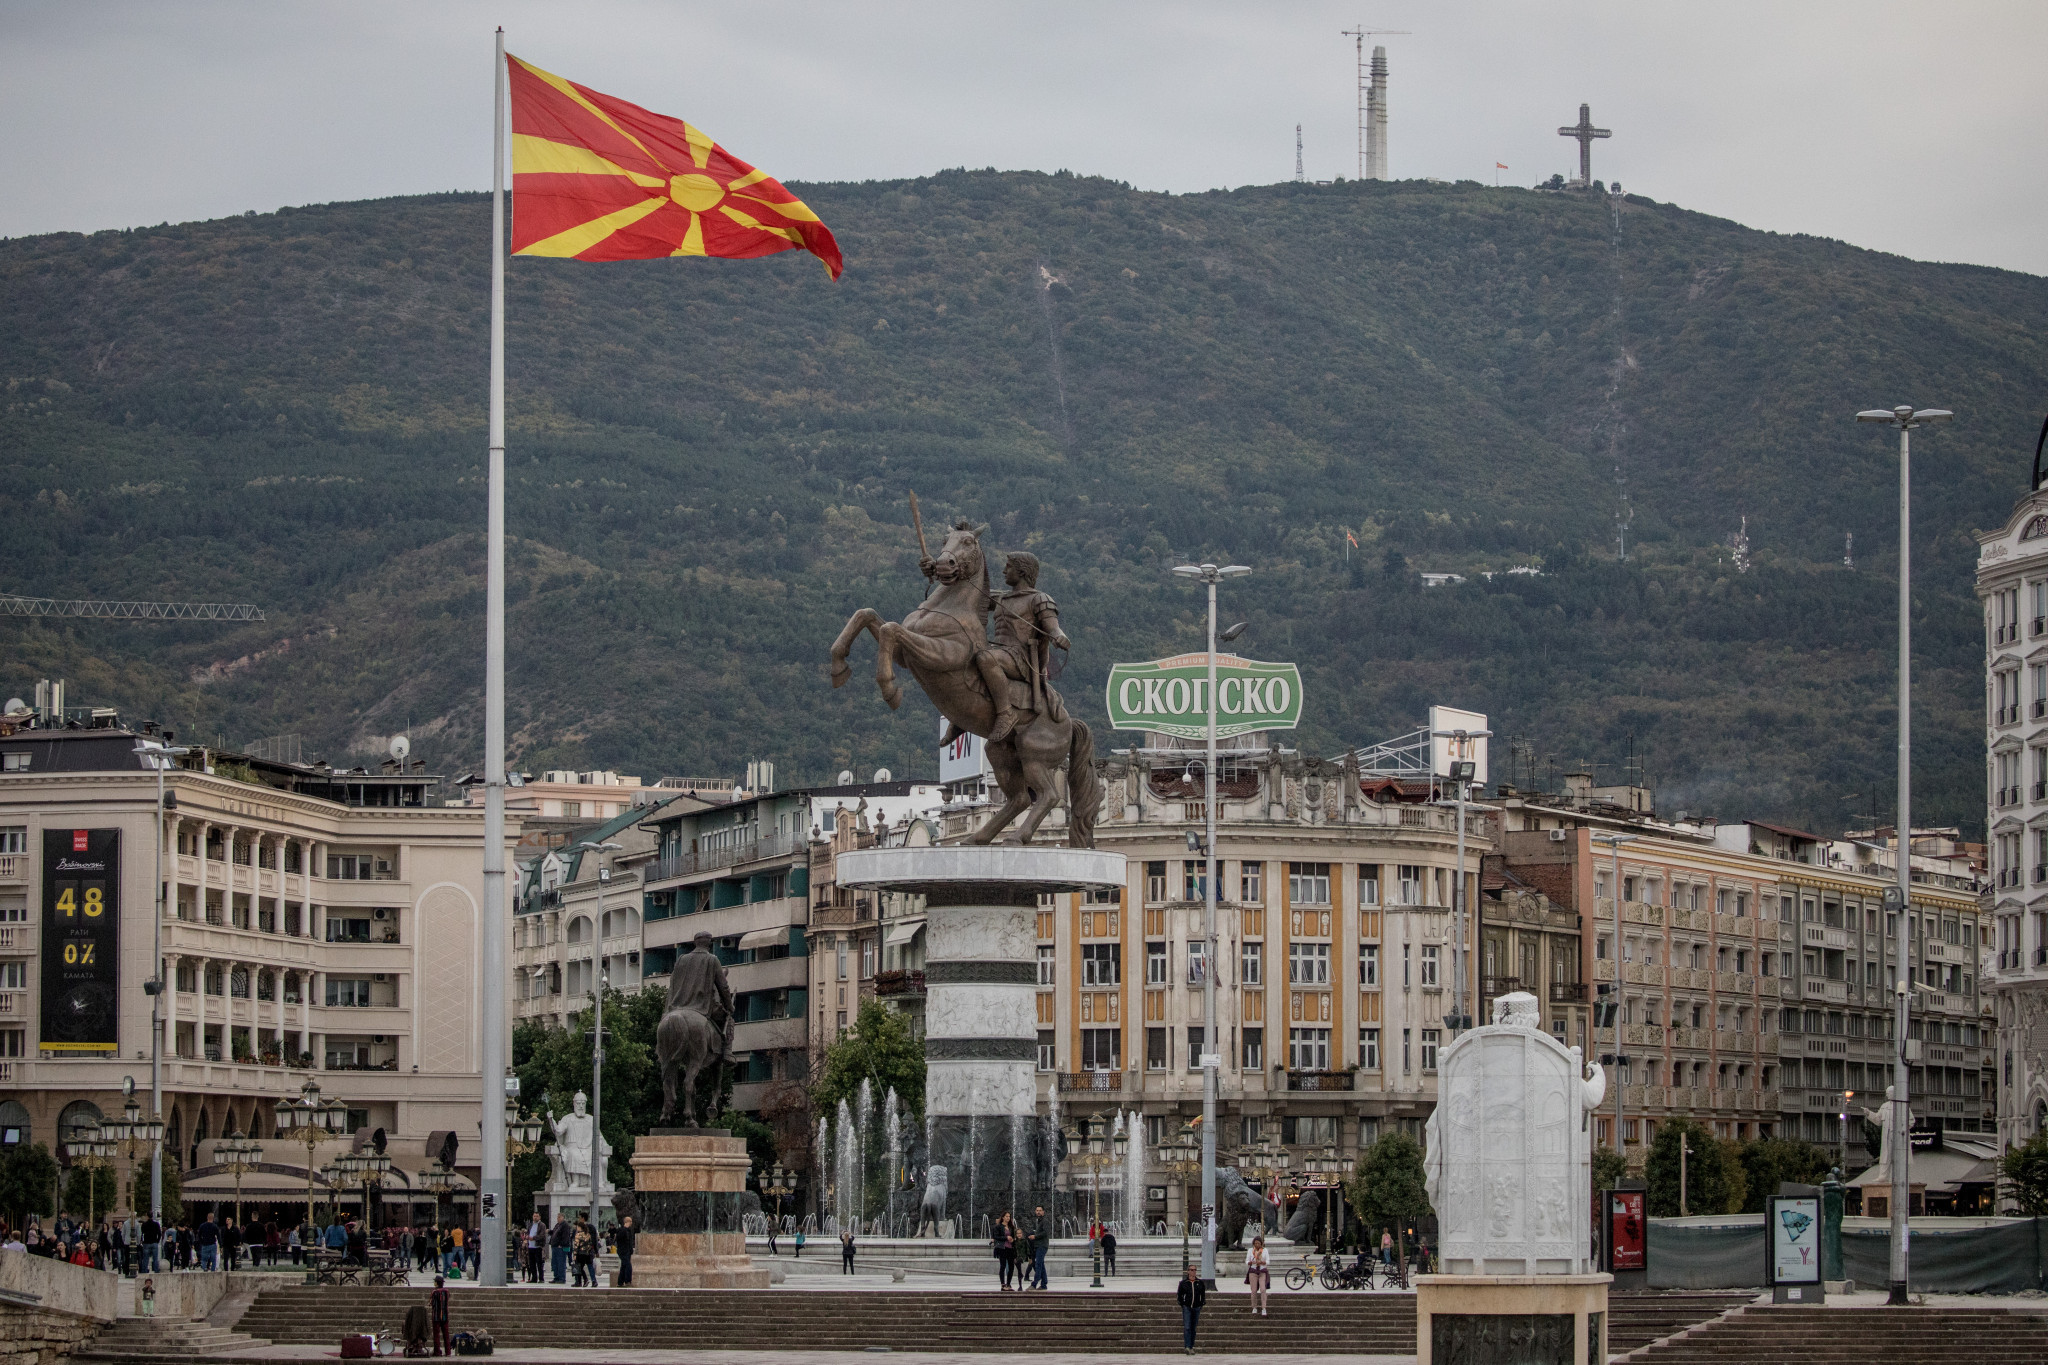 Skopje poised to stage second EOC Executive Committee meeting of the year